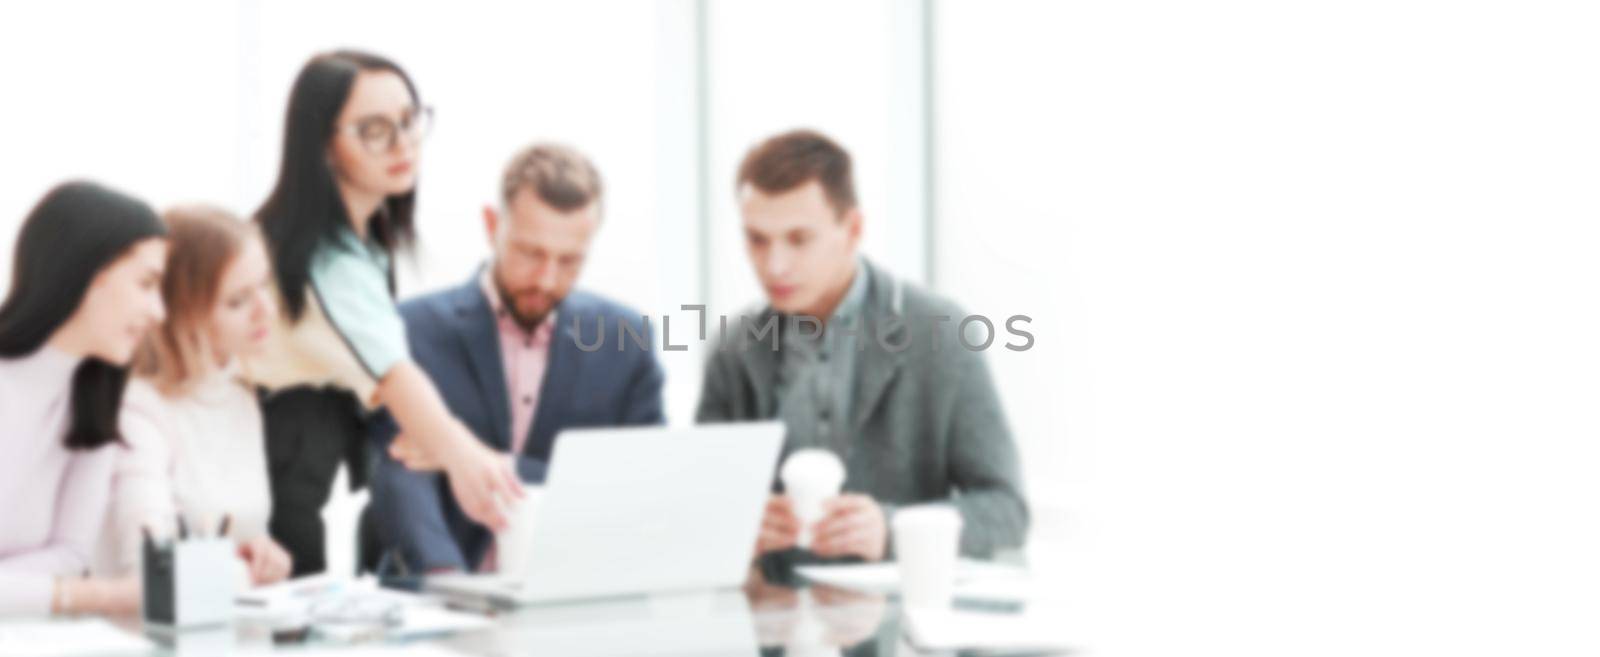 blurred image for the advertising text. business team discusses the new business plan at a briefing in the office. the concept of teamwork